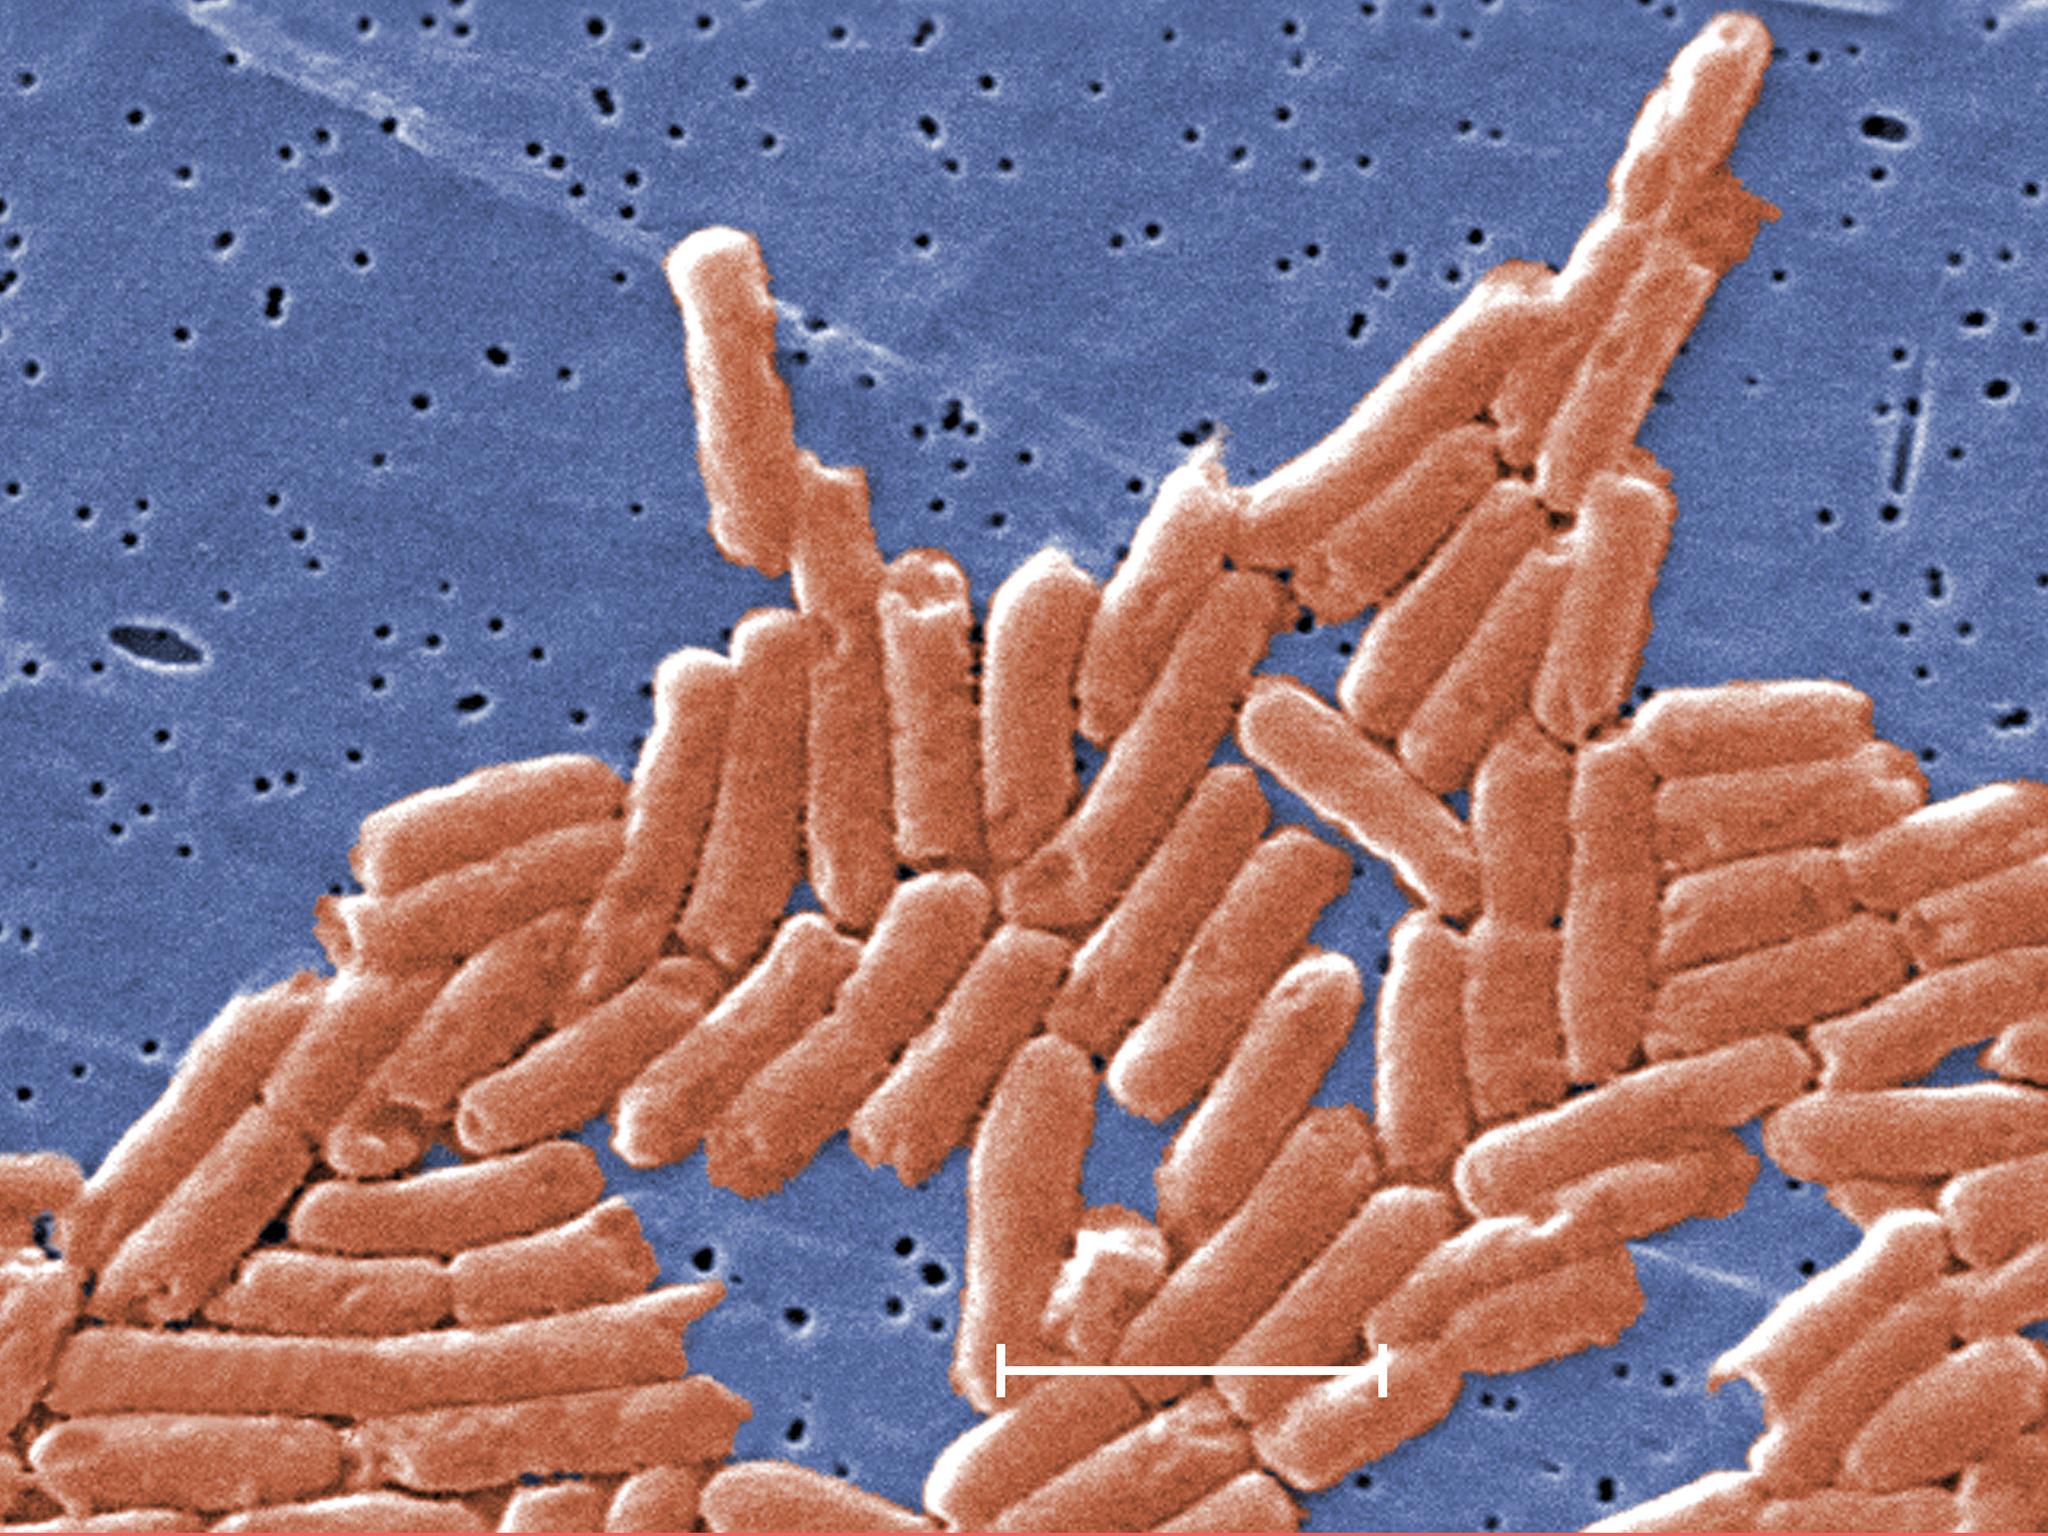 CDC have reported two outbreaks of salmonella